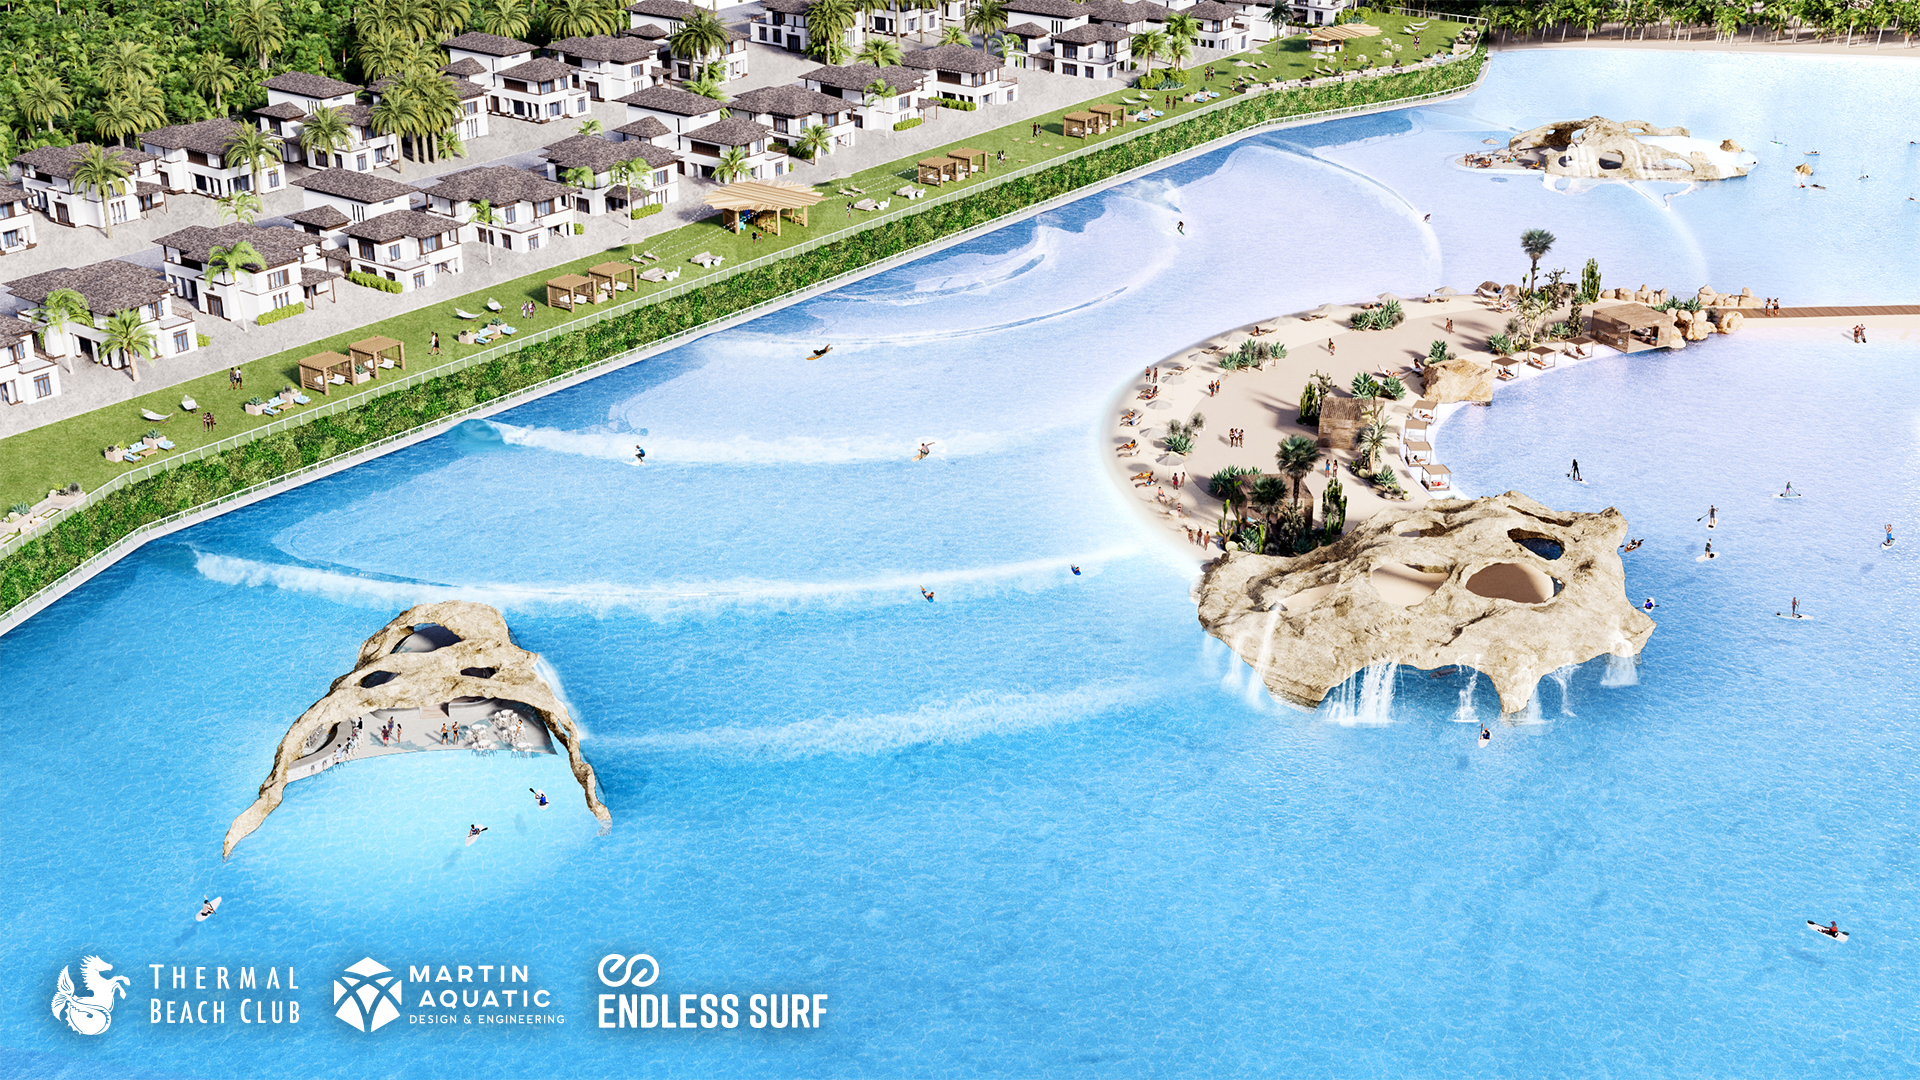 Coachella Valley's Thermal Beach Club announces details on  first-of-its-kind surf lagoon powered by Endless Surf « Amusement Today